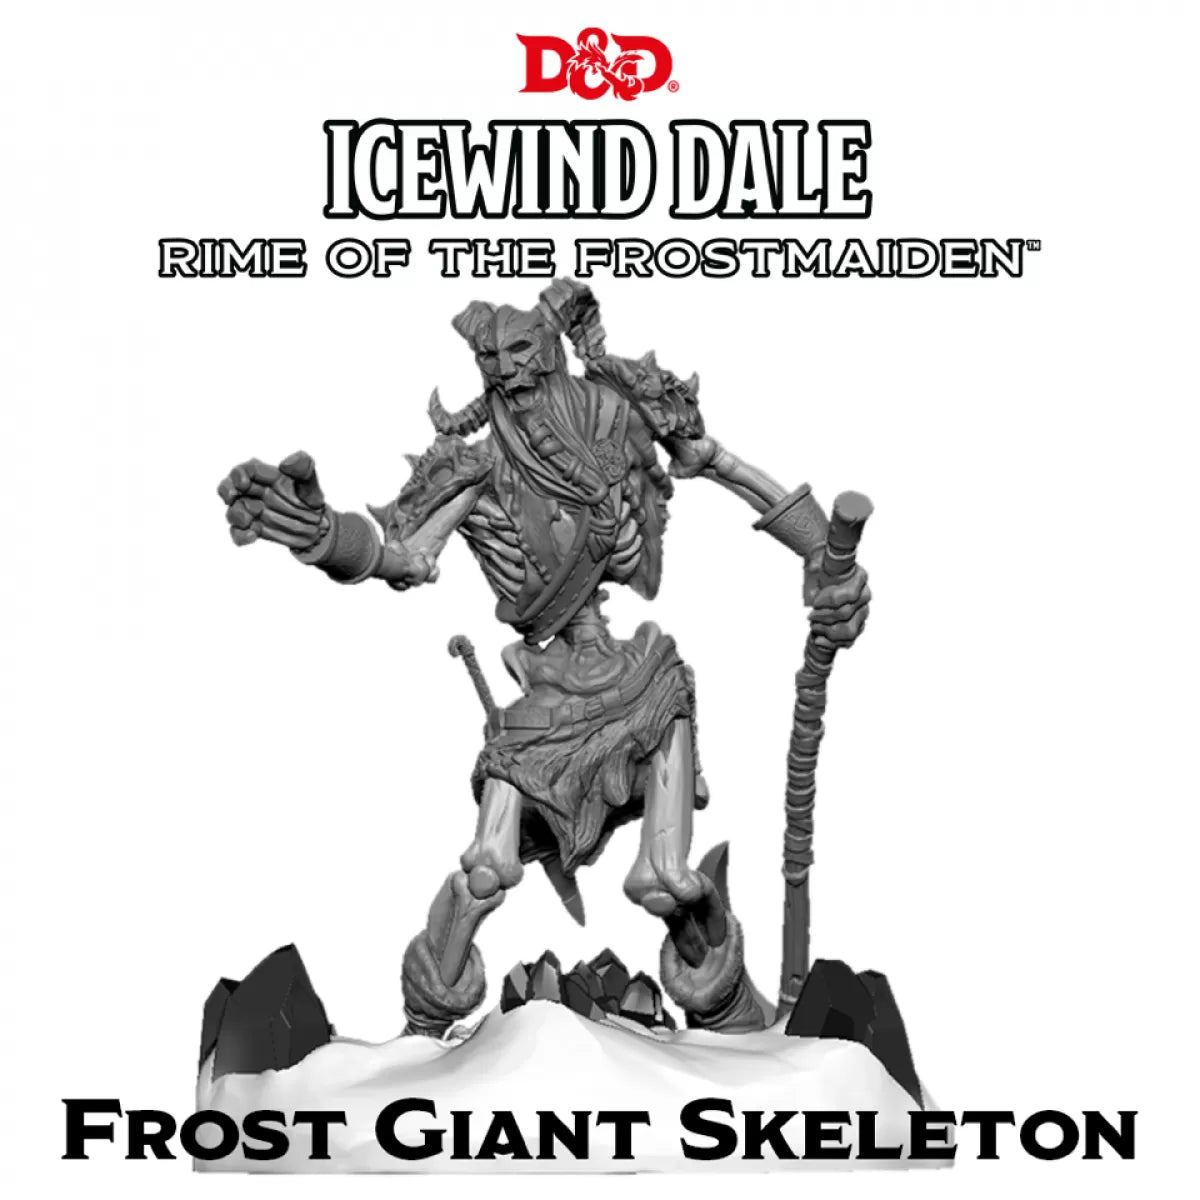 Dungeons &amp; Dragons - Icewind Dale Rime of the Frostmaiden Frost Giant Skeleton